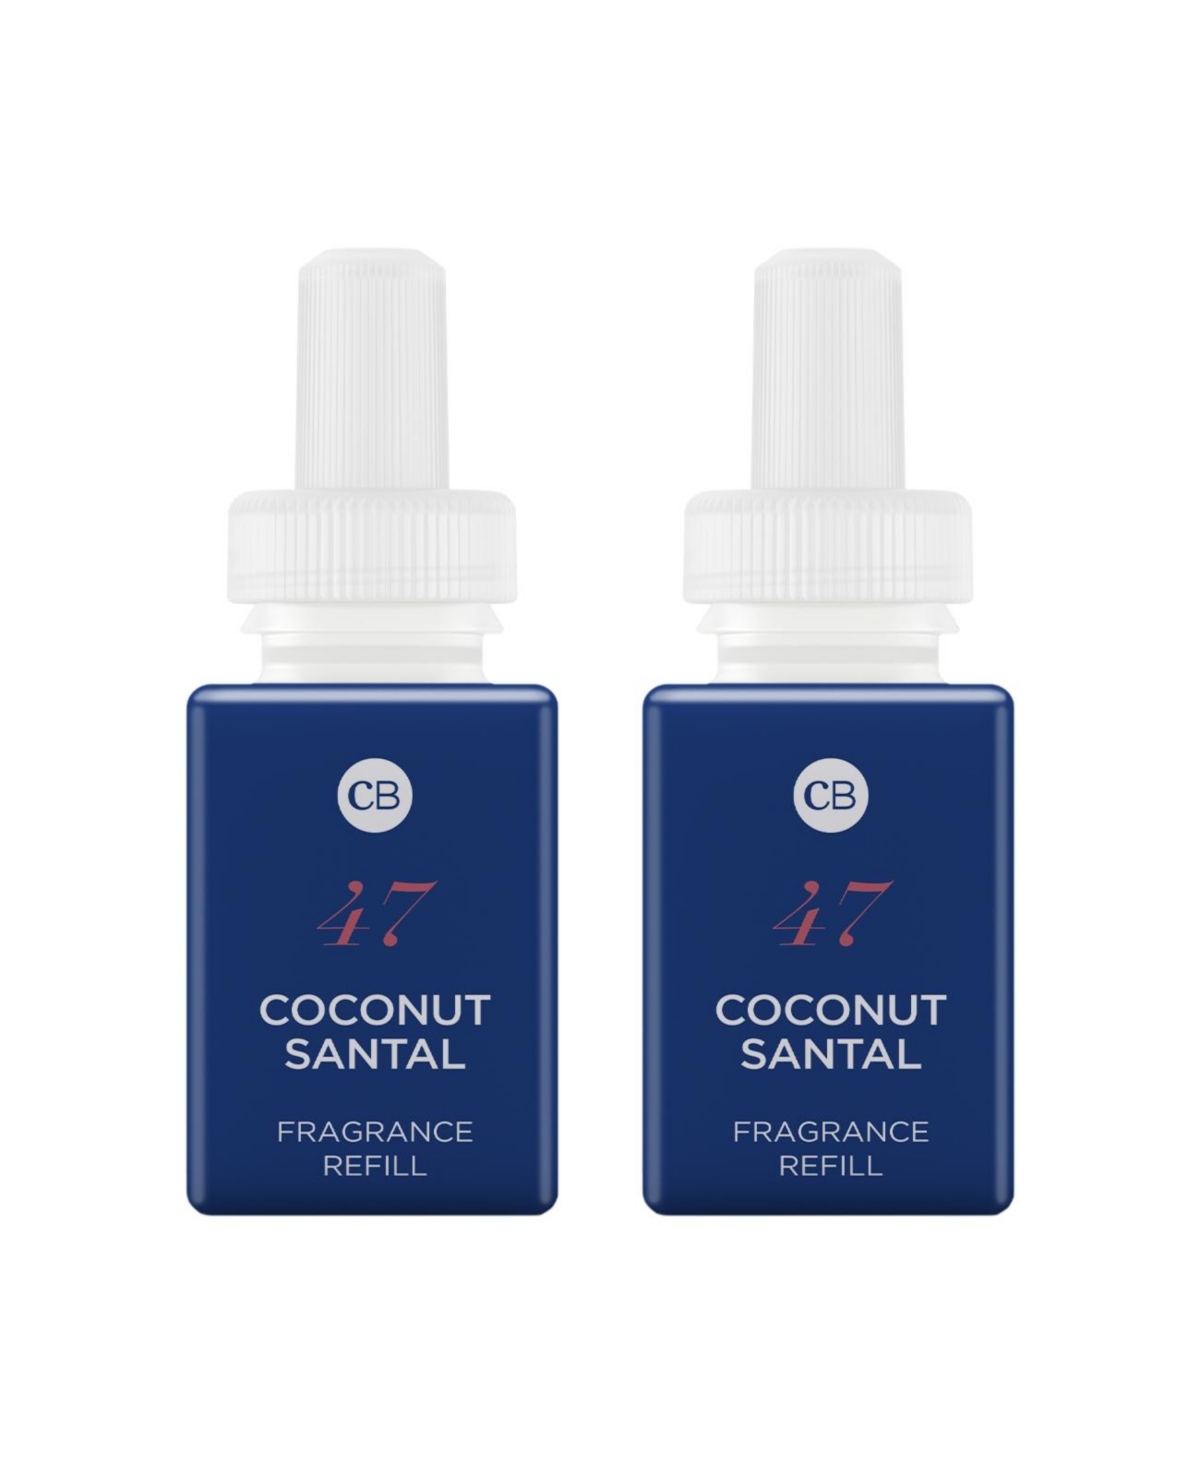 and Capri Blue - Coconut Santal - Fragrance for Smart Home Air Diffusers - Room Freshener - Aromatherapy Scents for Bedrooms & Living Rooms - 2 P